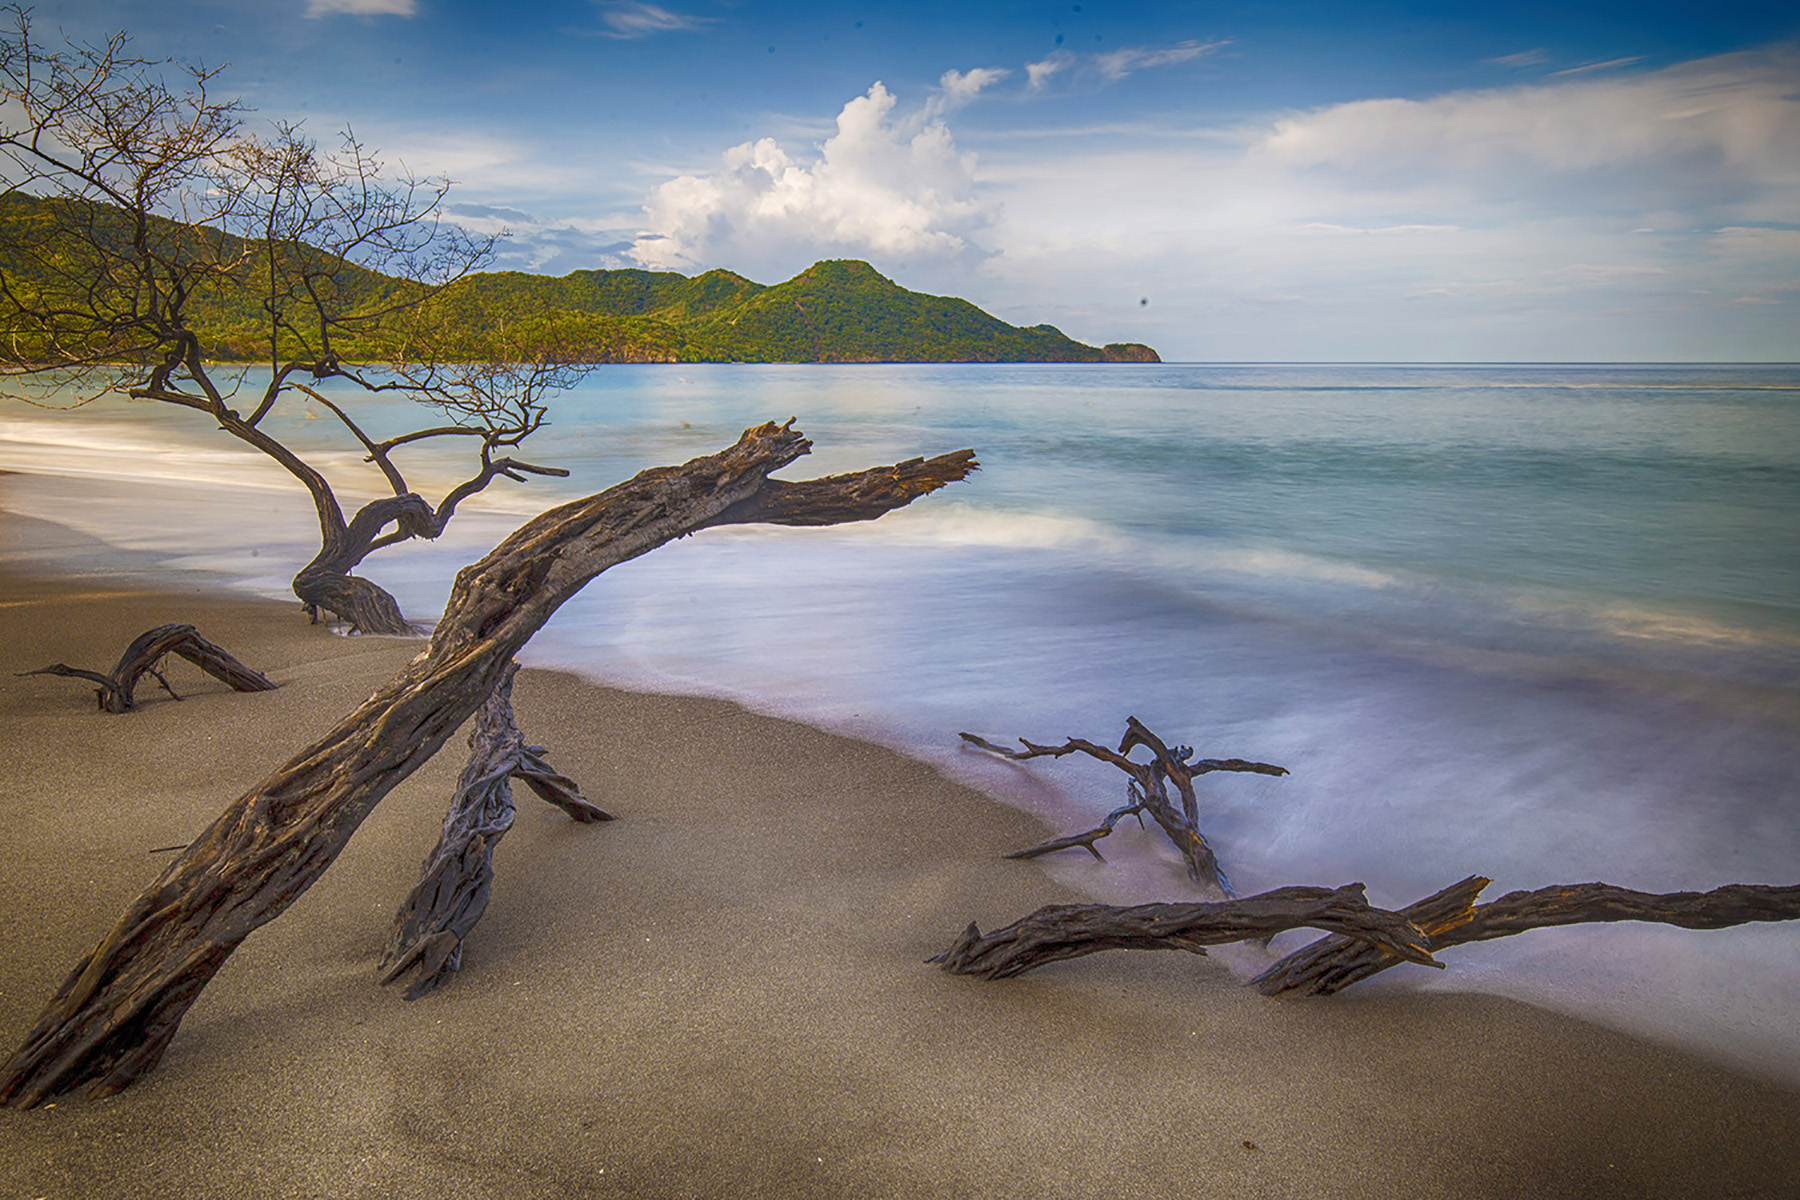 Travels to Costa Rica: A Photo Adventure